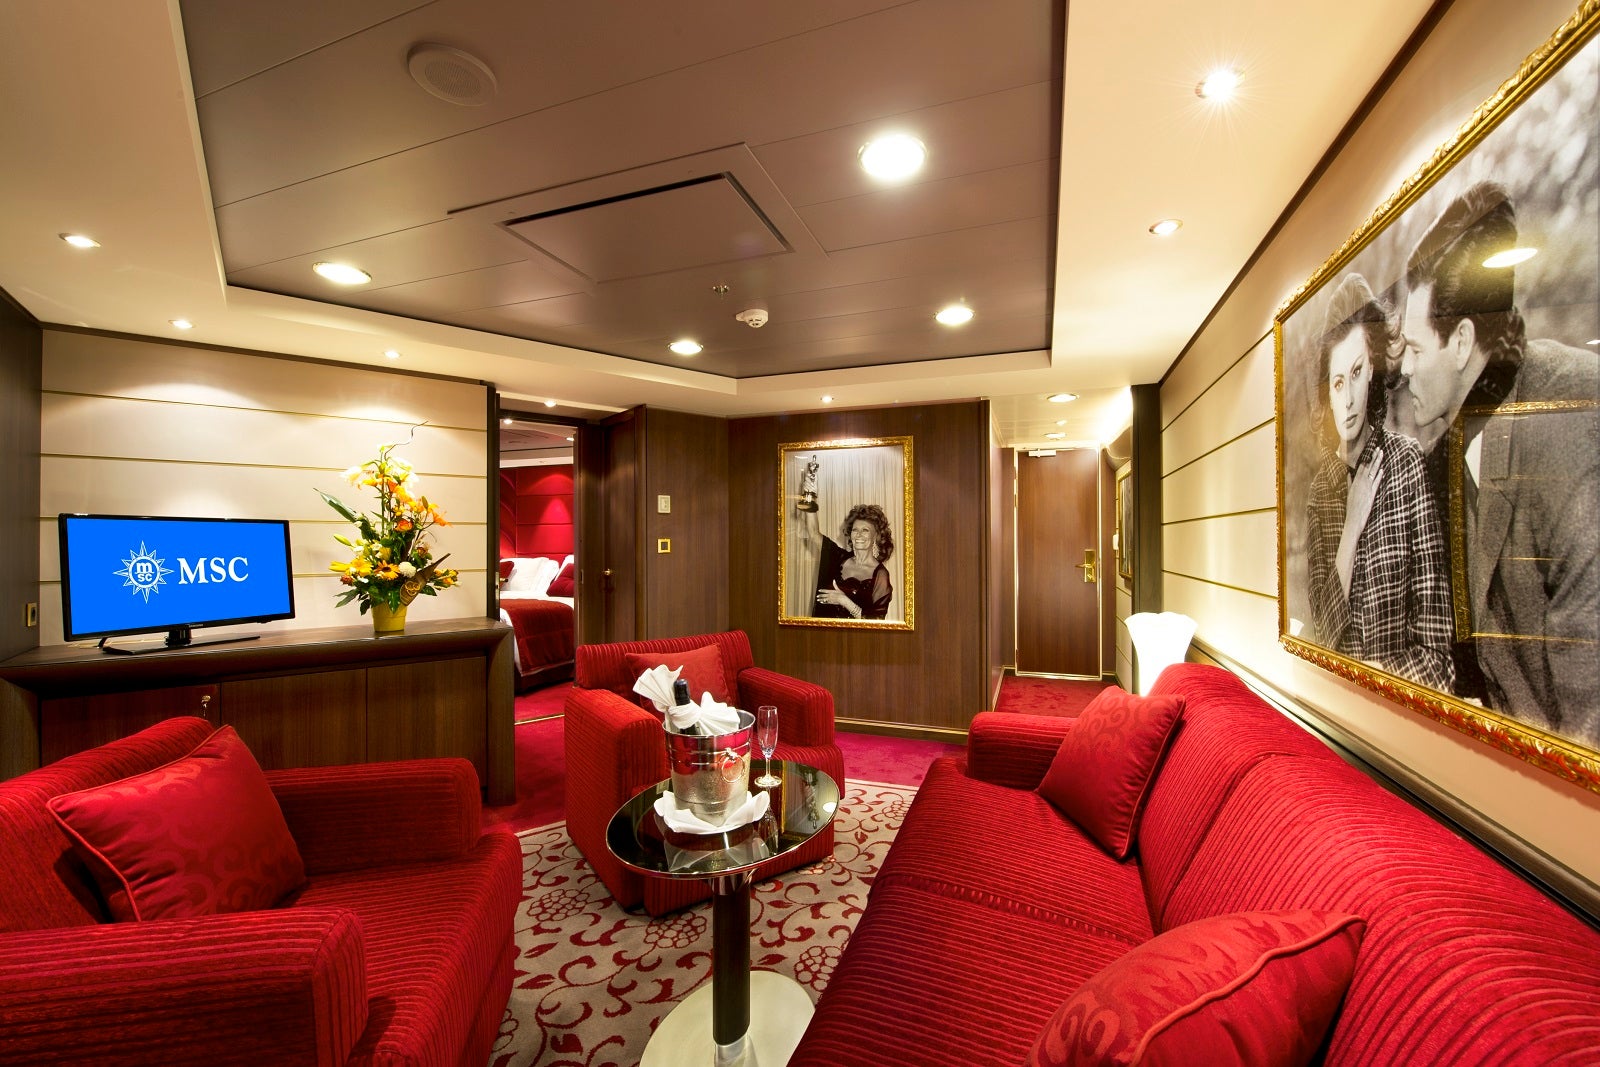 A cruise ship cabin with bright red chairs and a sofa, with black and white photos on the walls